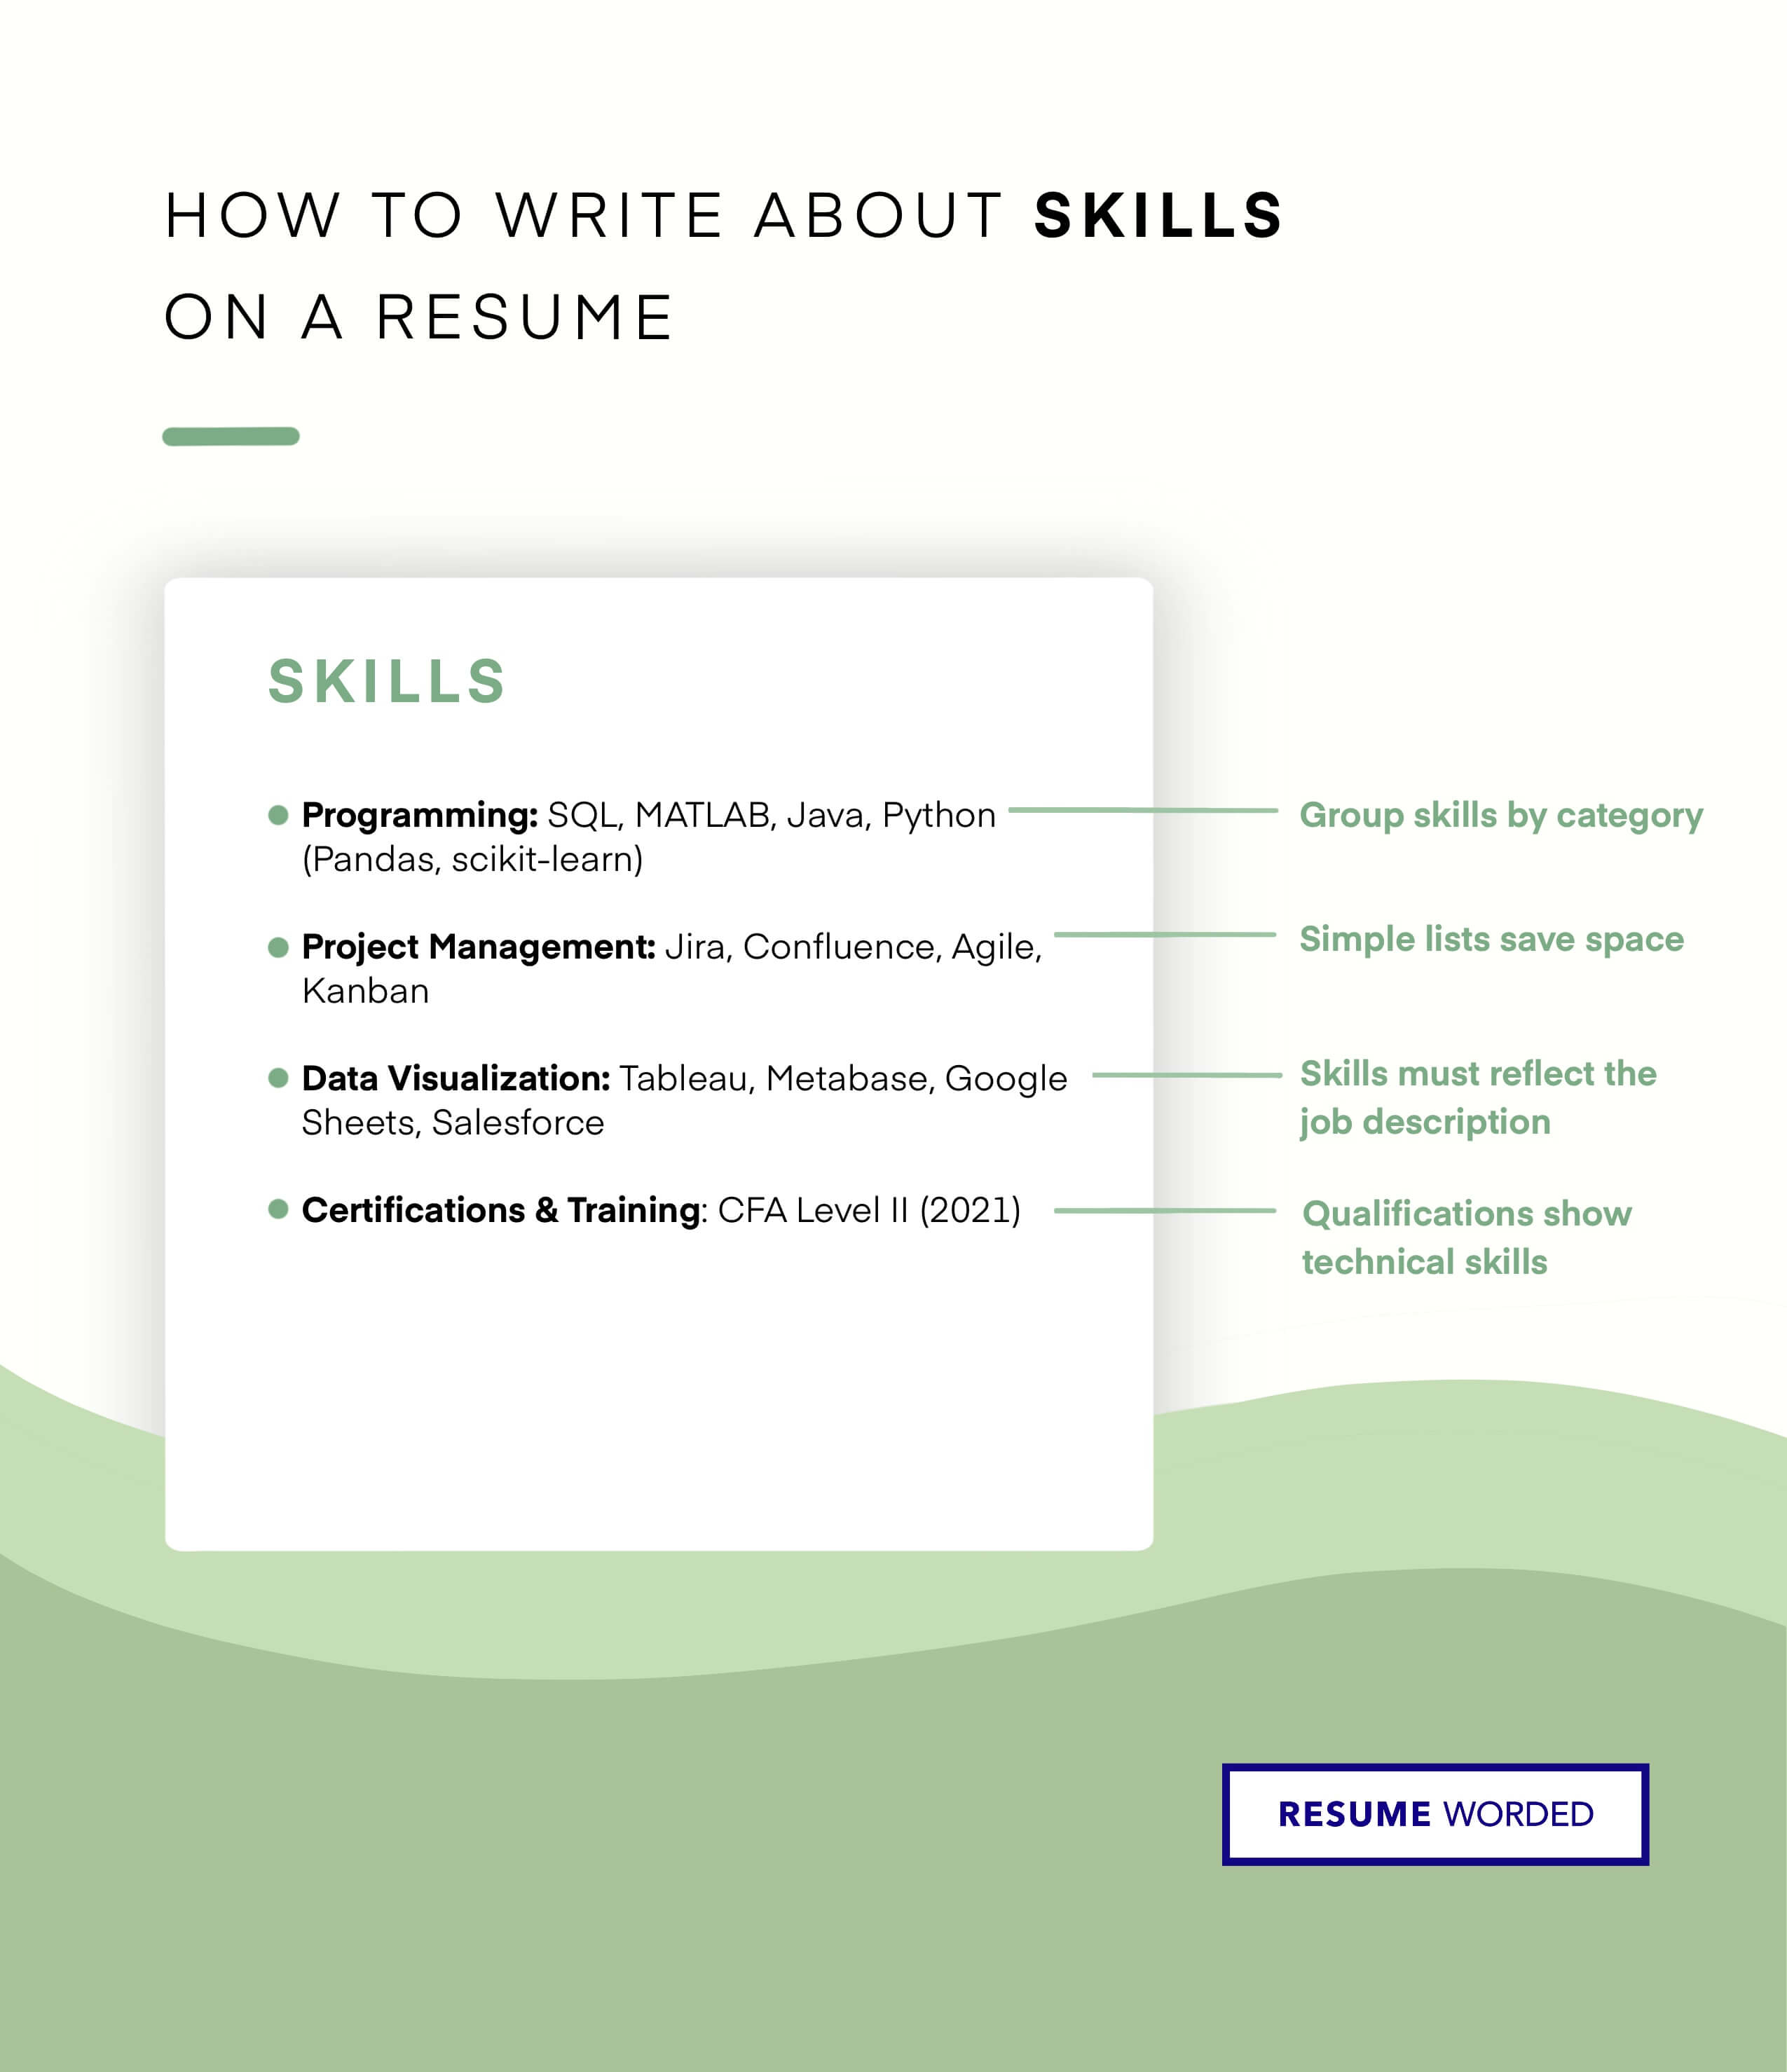 The skills match the experience - Web Developer Resume